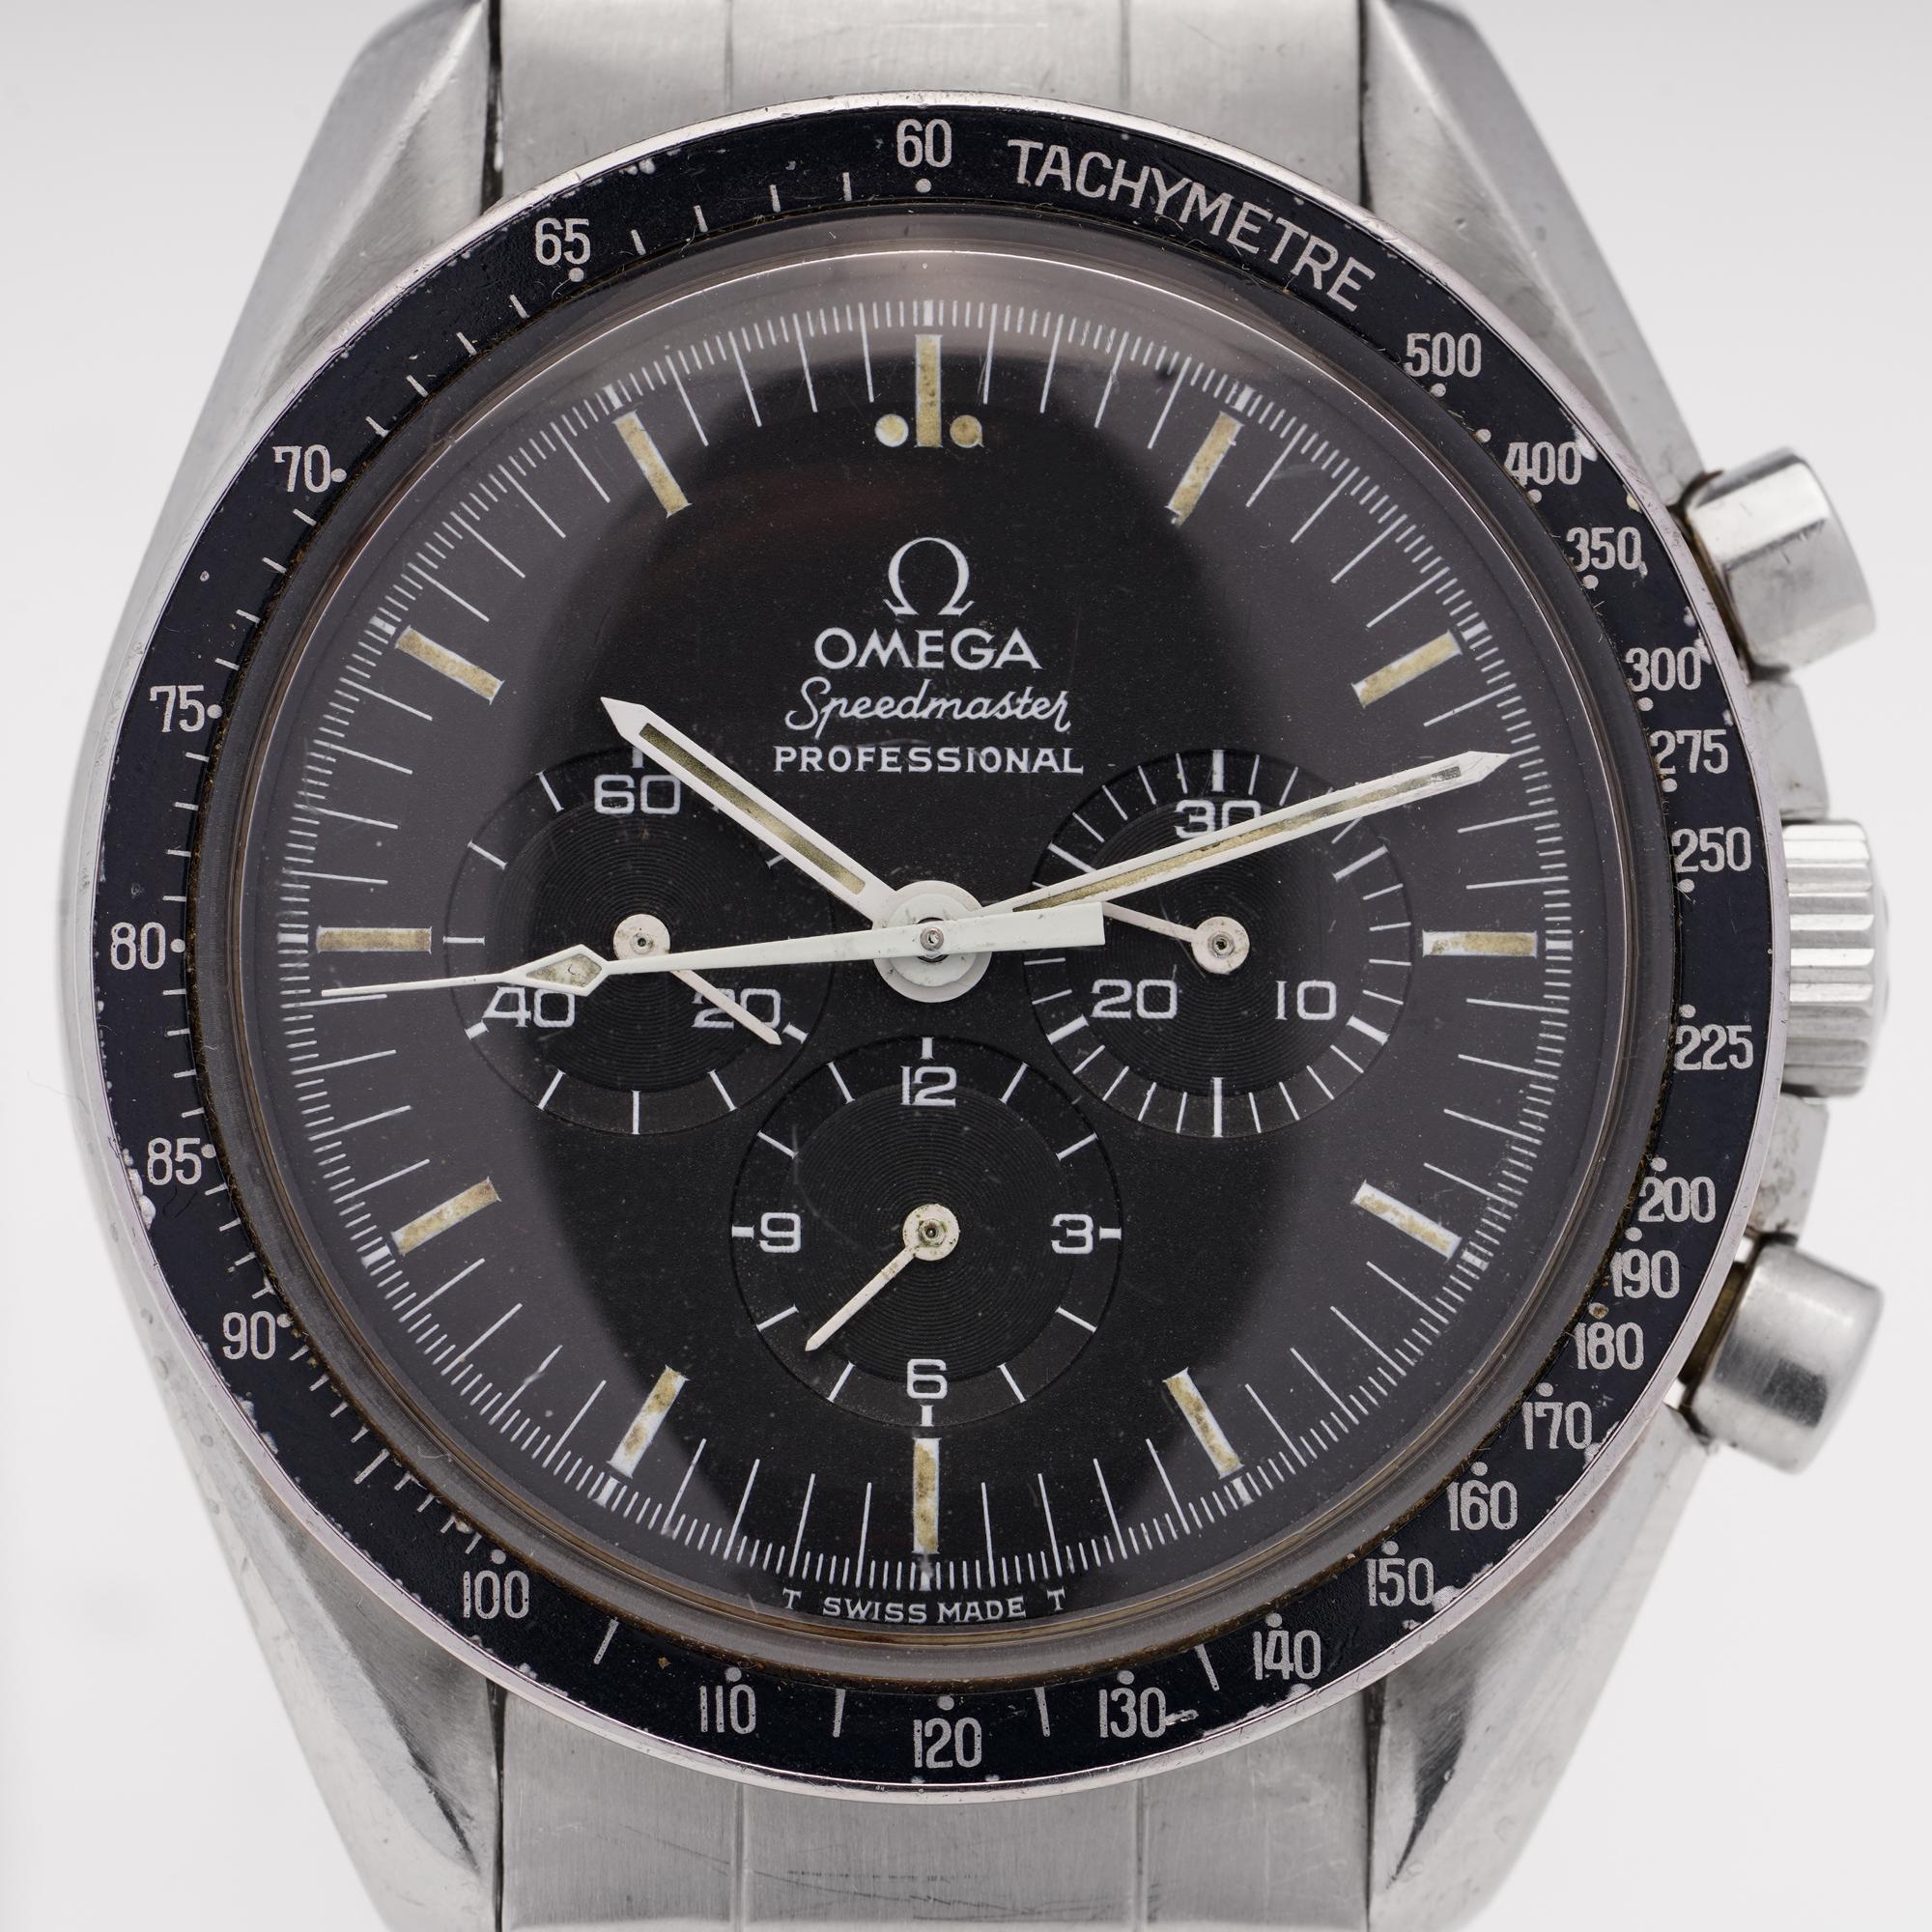 Omega Speedmaster Professional ‘Moonwatch’
Made in Switzerland, 1974
Ref. 145.022
 
Speedmaster moon watch with an inscription on the rear case back
NASA Flight Qualified for all Manned Space Missions,
The first timepiece worn on the moon.

Case